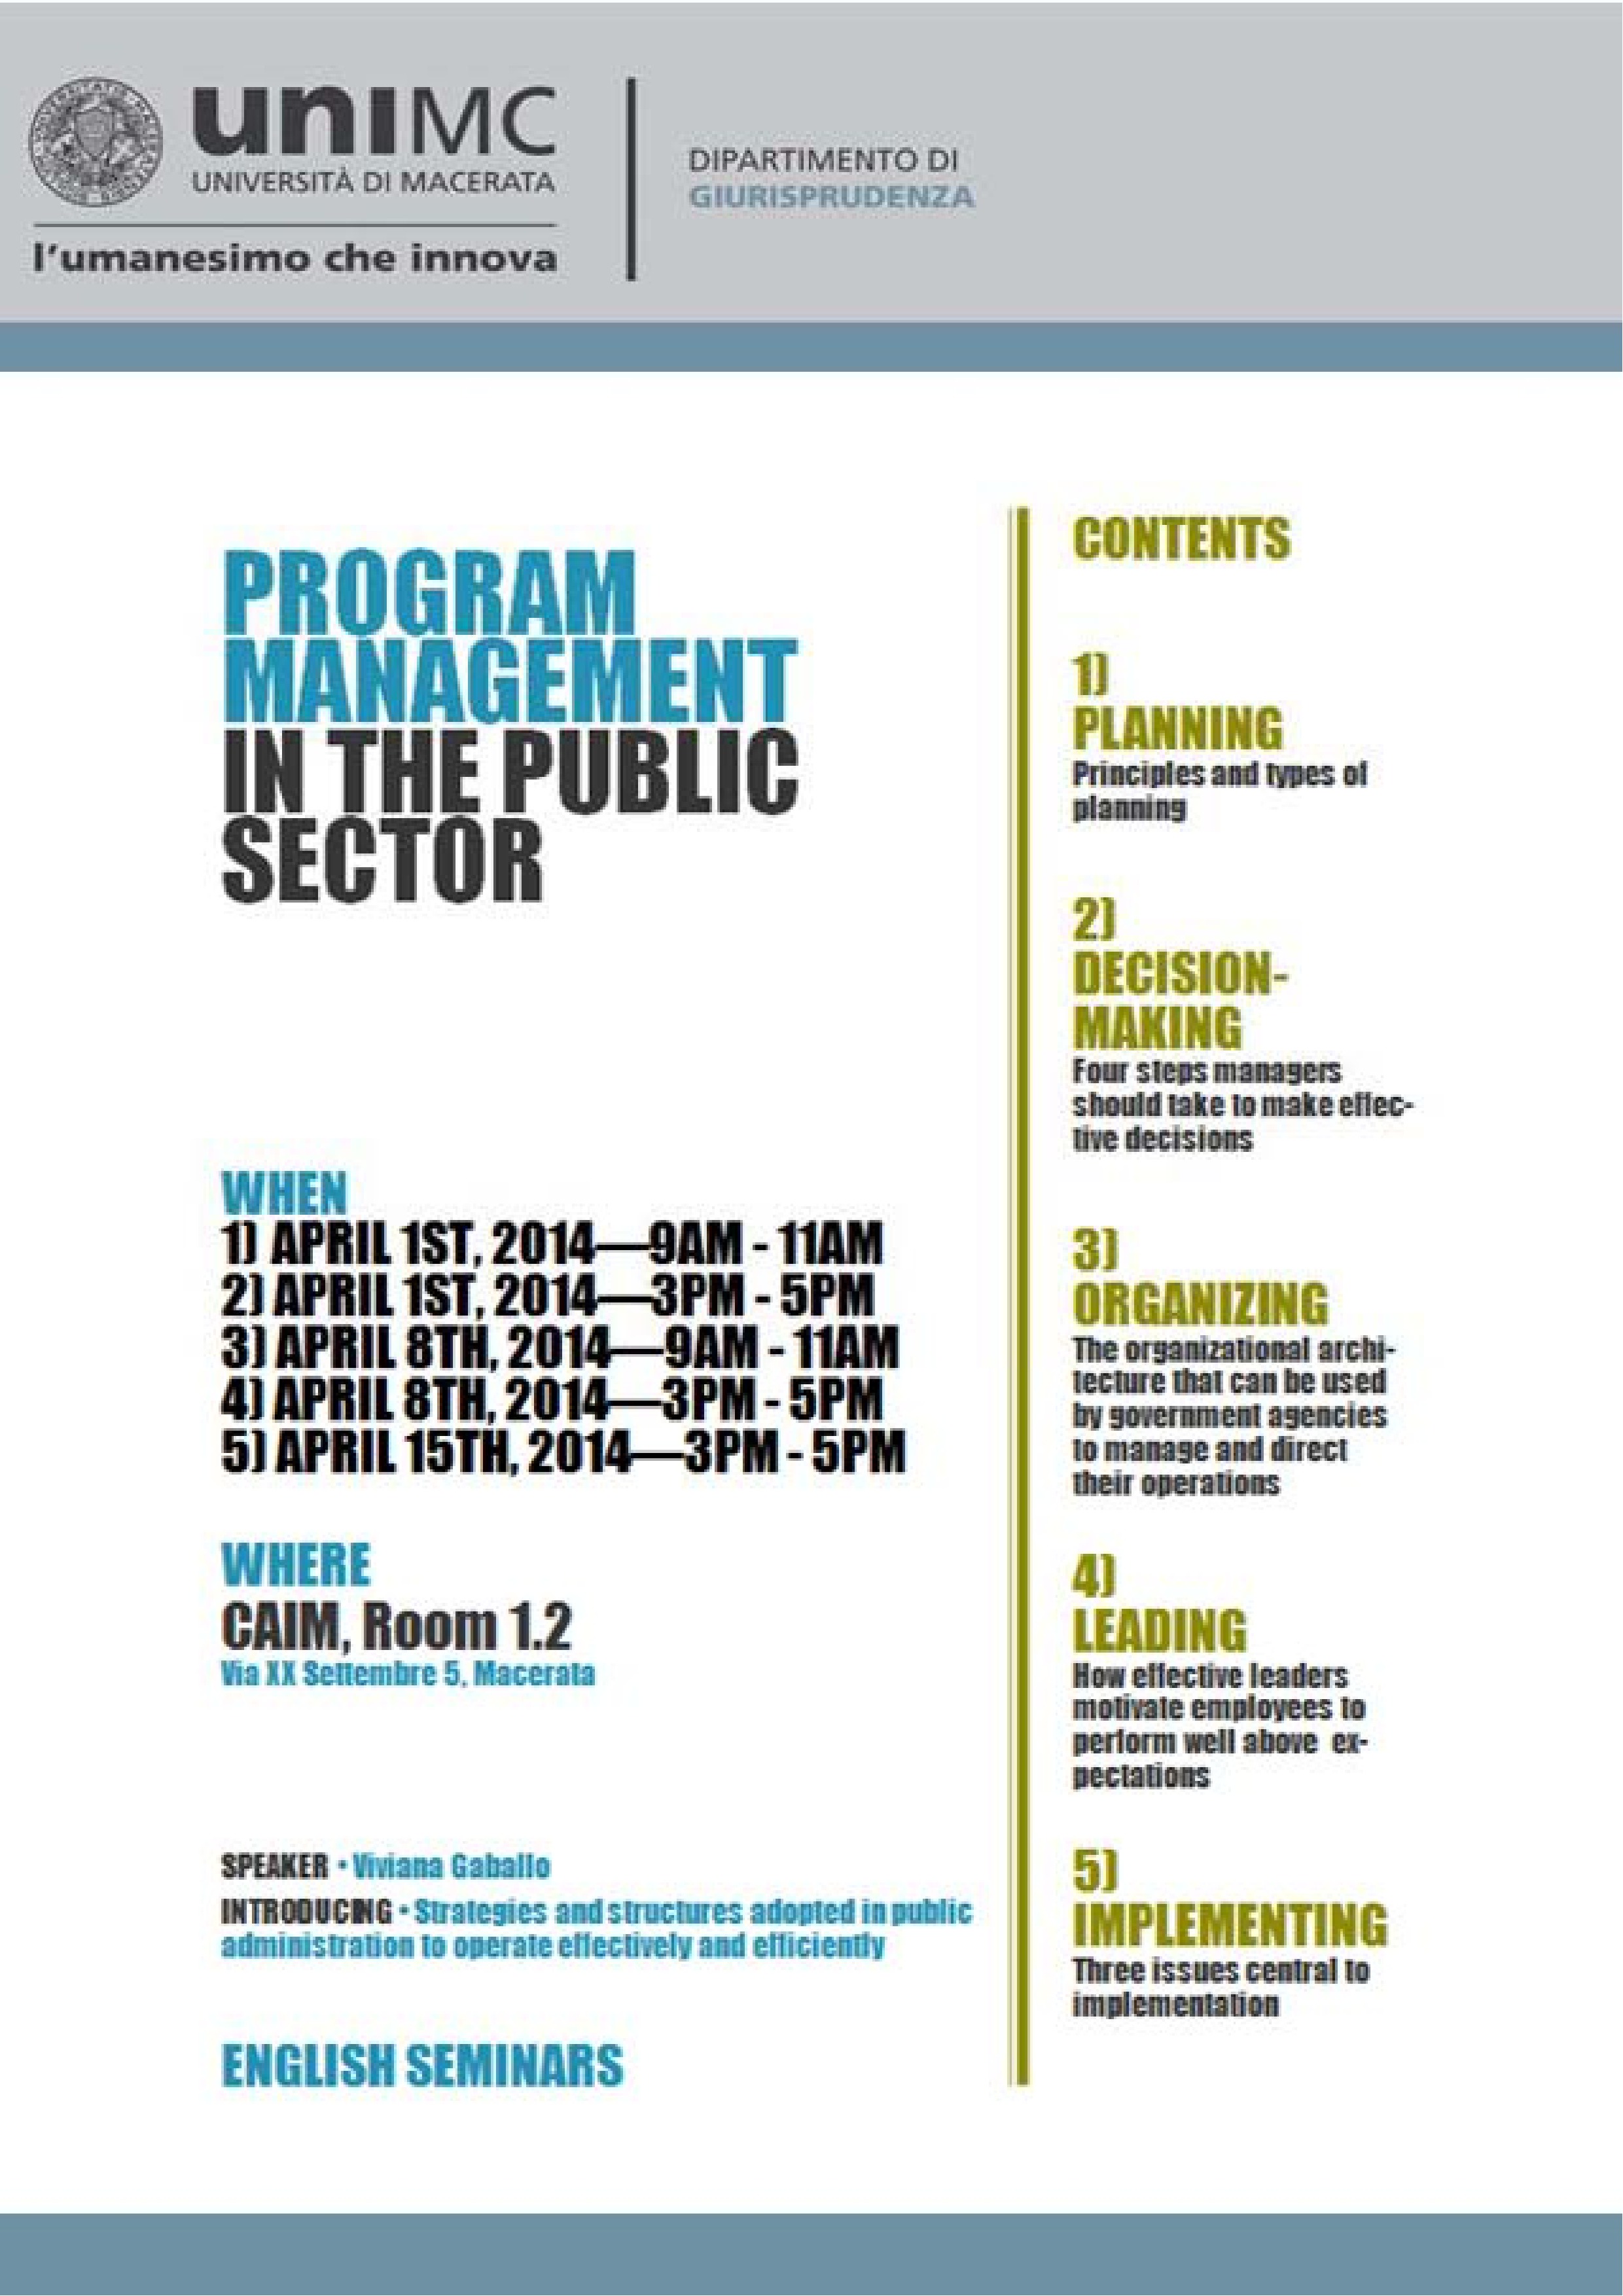 PROGRAM MANAGEMENT IN THE PUBLIC SECTOR (English seminars with credits, 1/8/15.04.2014)